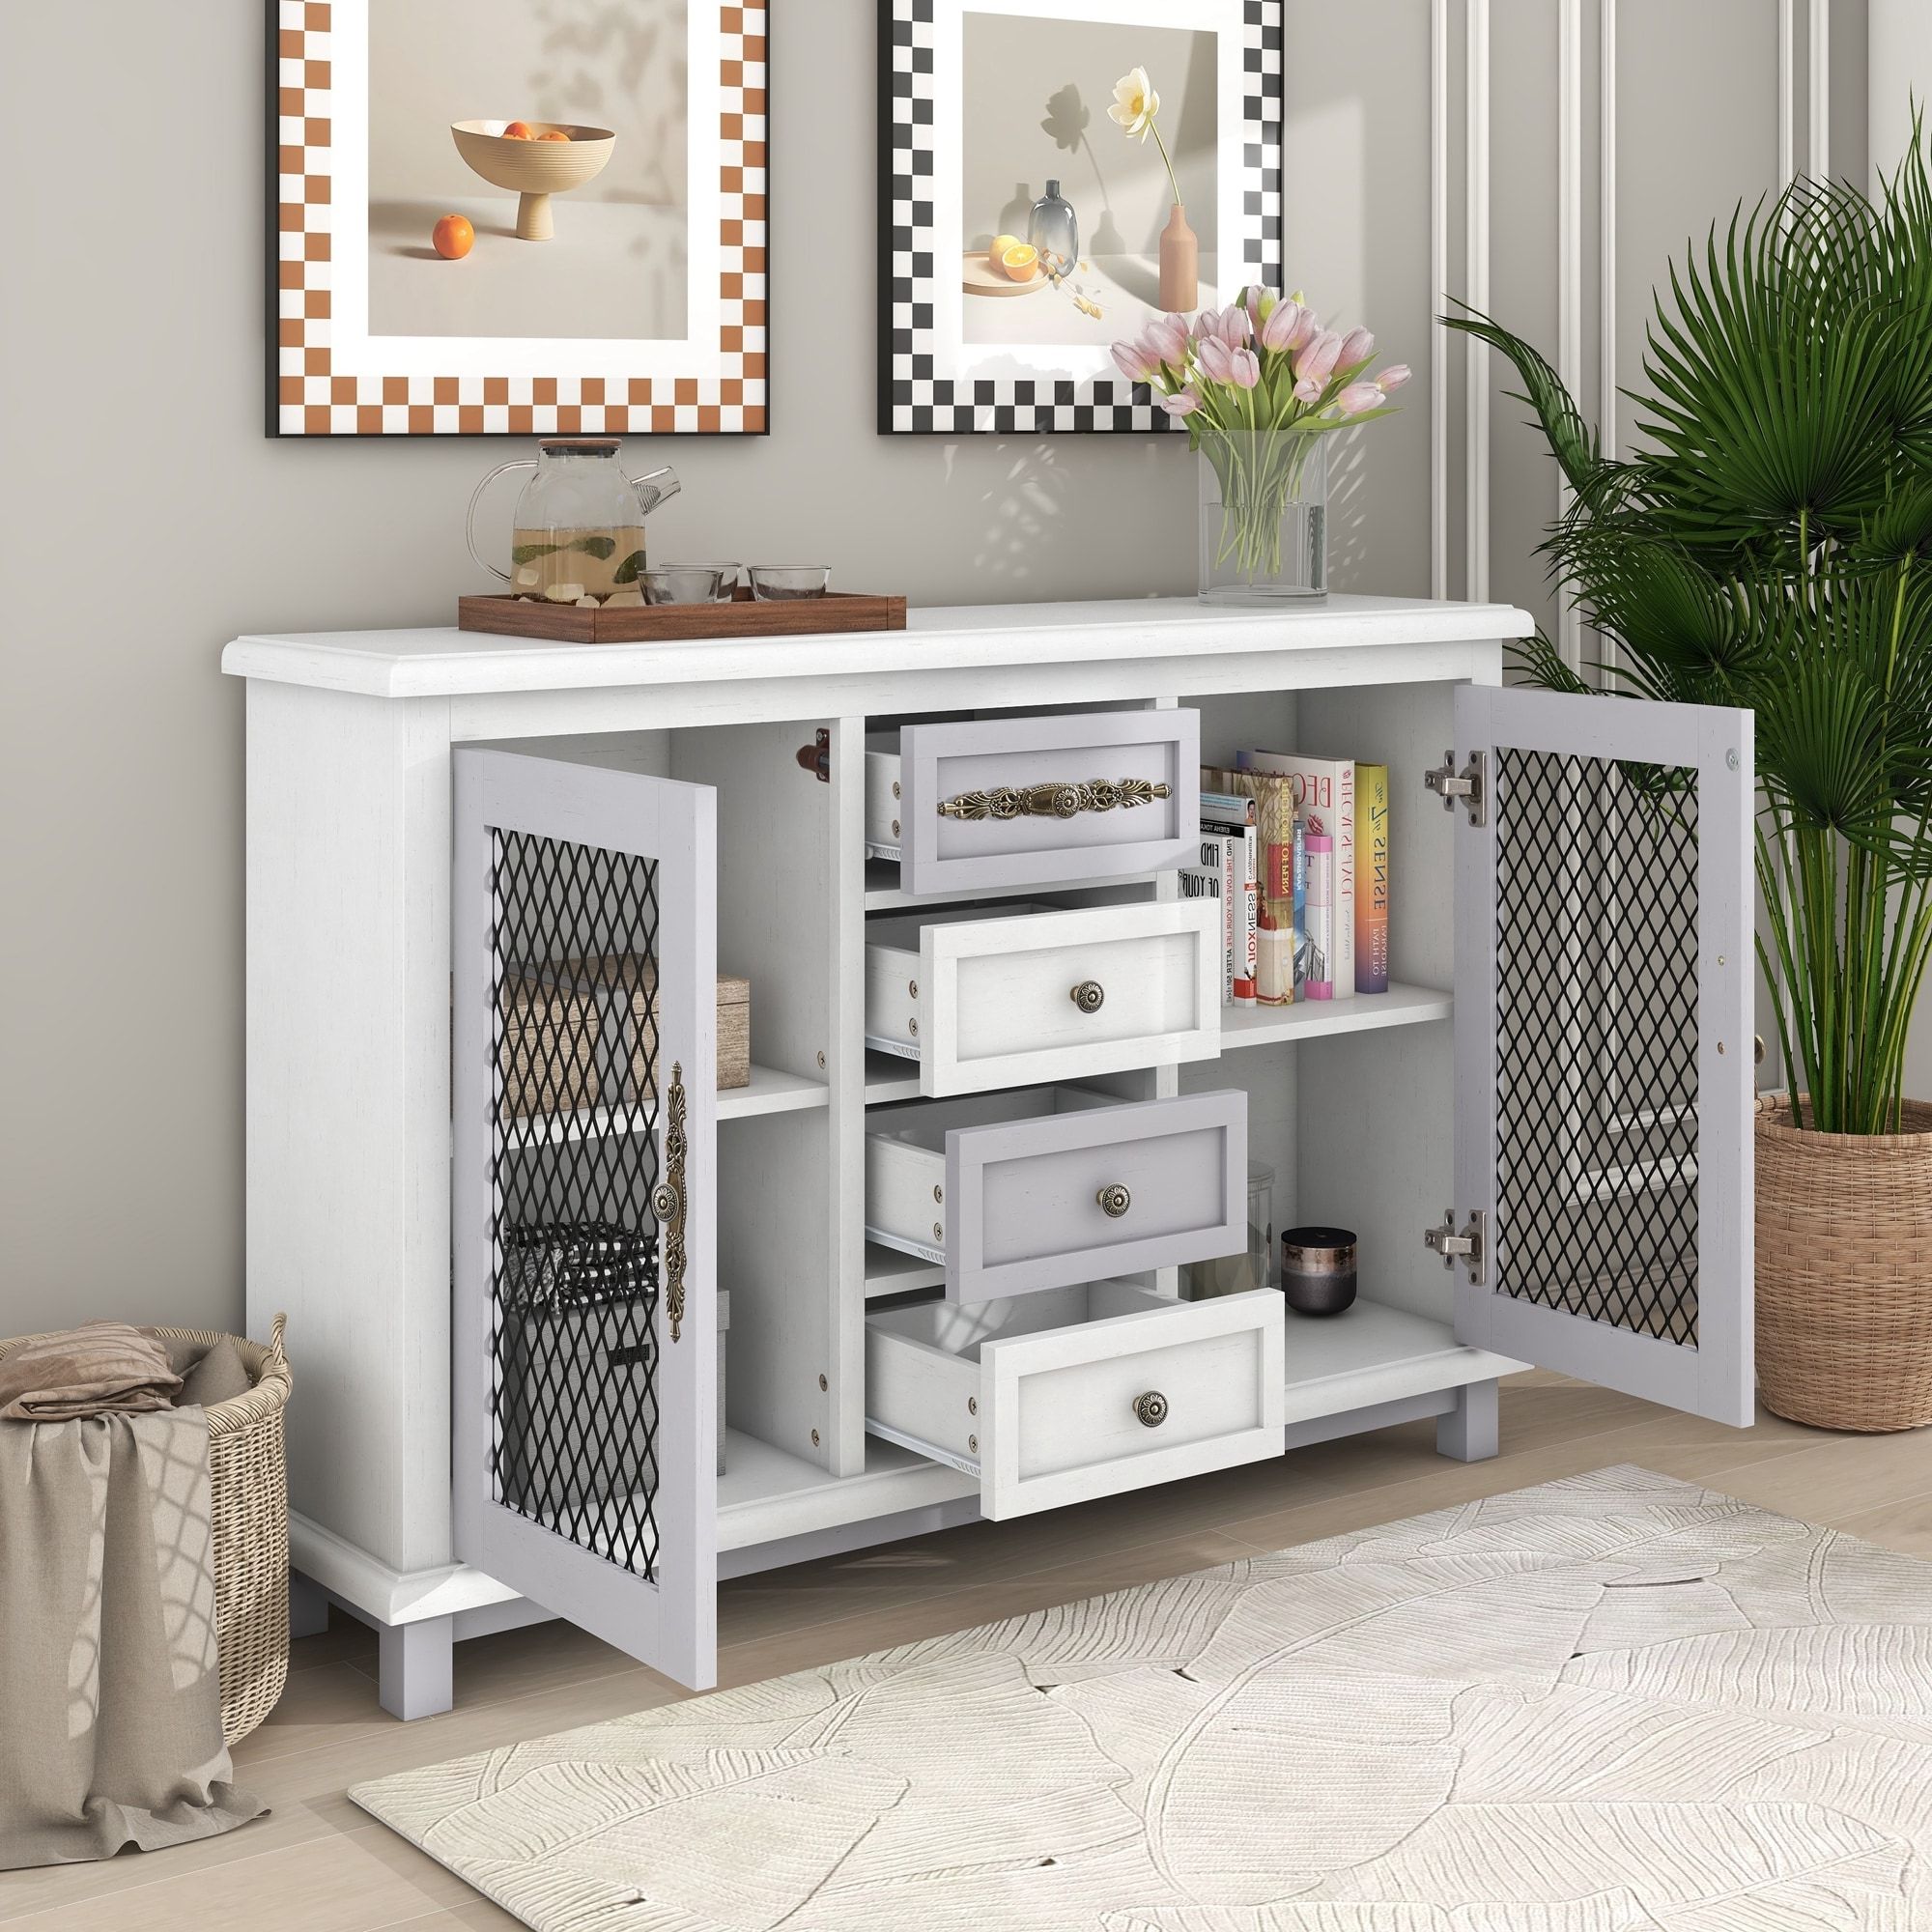 Living Room Buffet Cabinet With 4 Drawers And 2 Iron Mesh Doors – Bed Bath  & Beyond – 38460077 Pertaining To 2019 Sideboards With Breathable Mesh Doors (View 6 of 10)